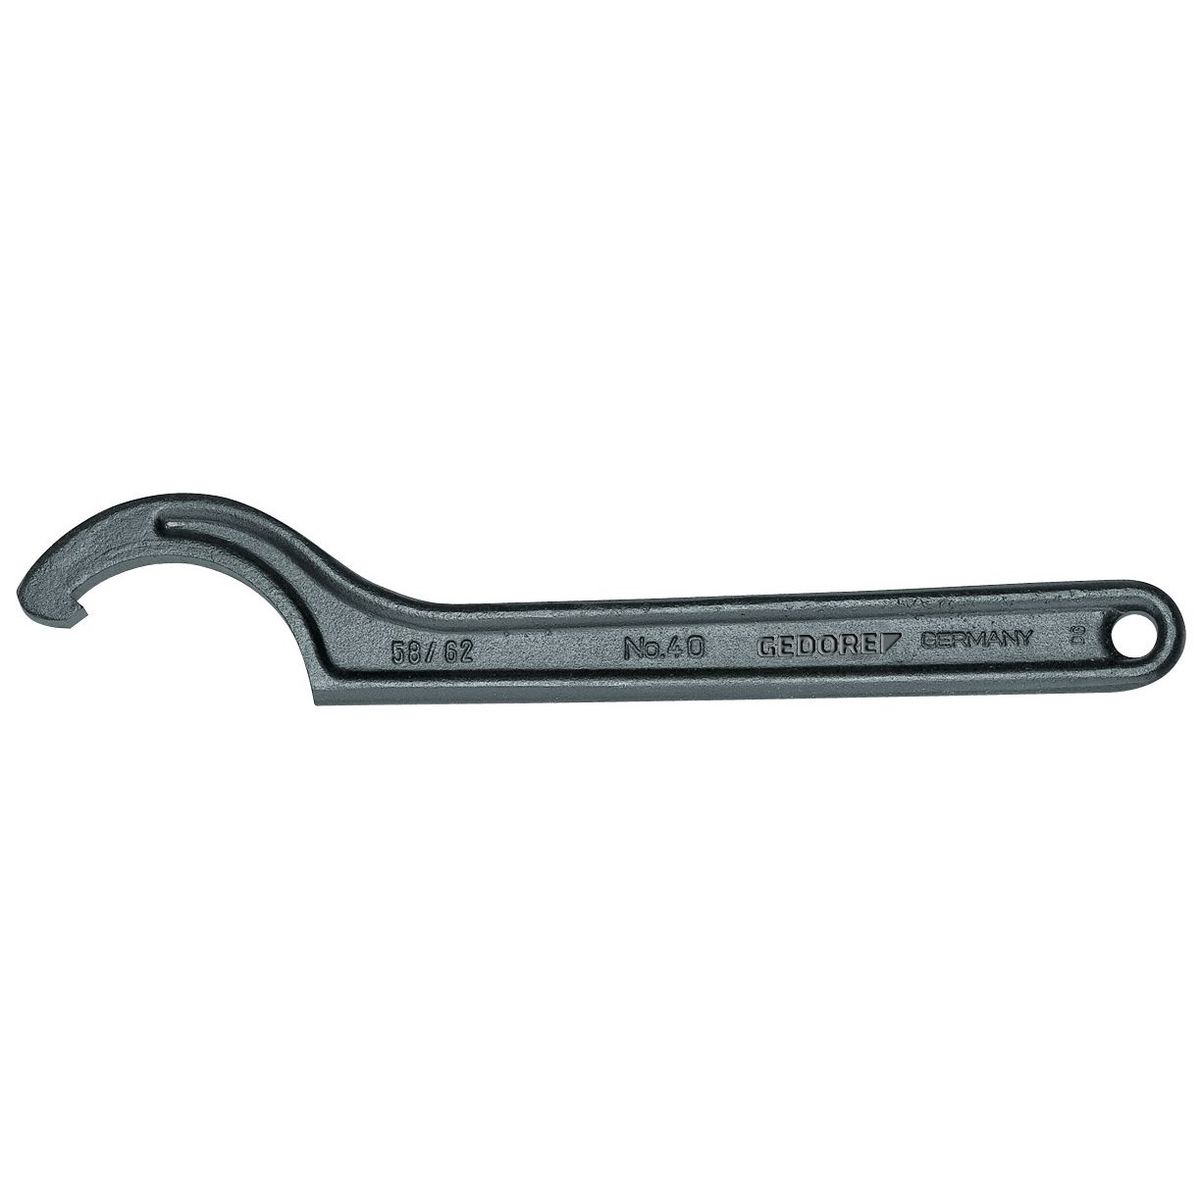 Hook wrench with lug, 34-36mm No.40 34-36 Gedore